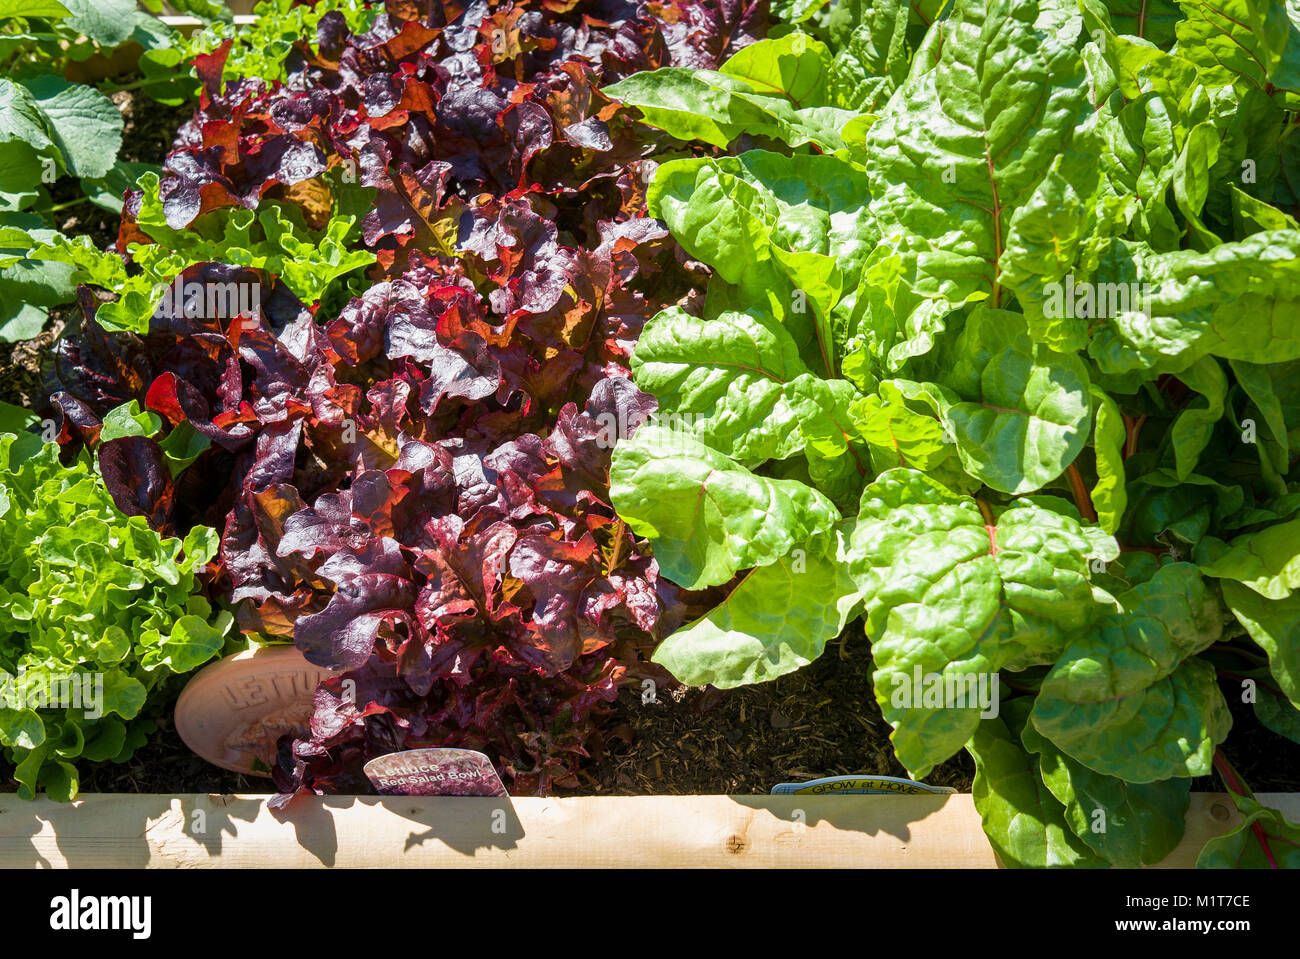 Edible leaves growing in a raised planter for home-grown salad and vegetables in UK Stock Photo